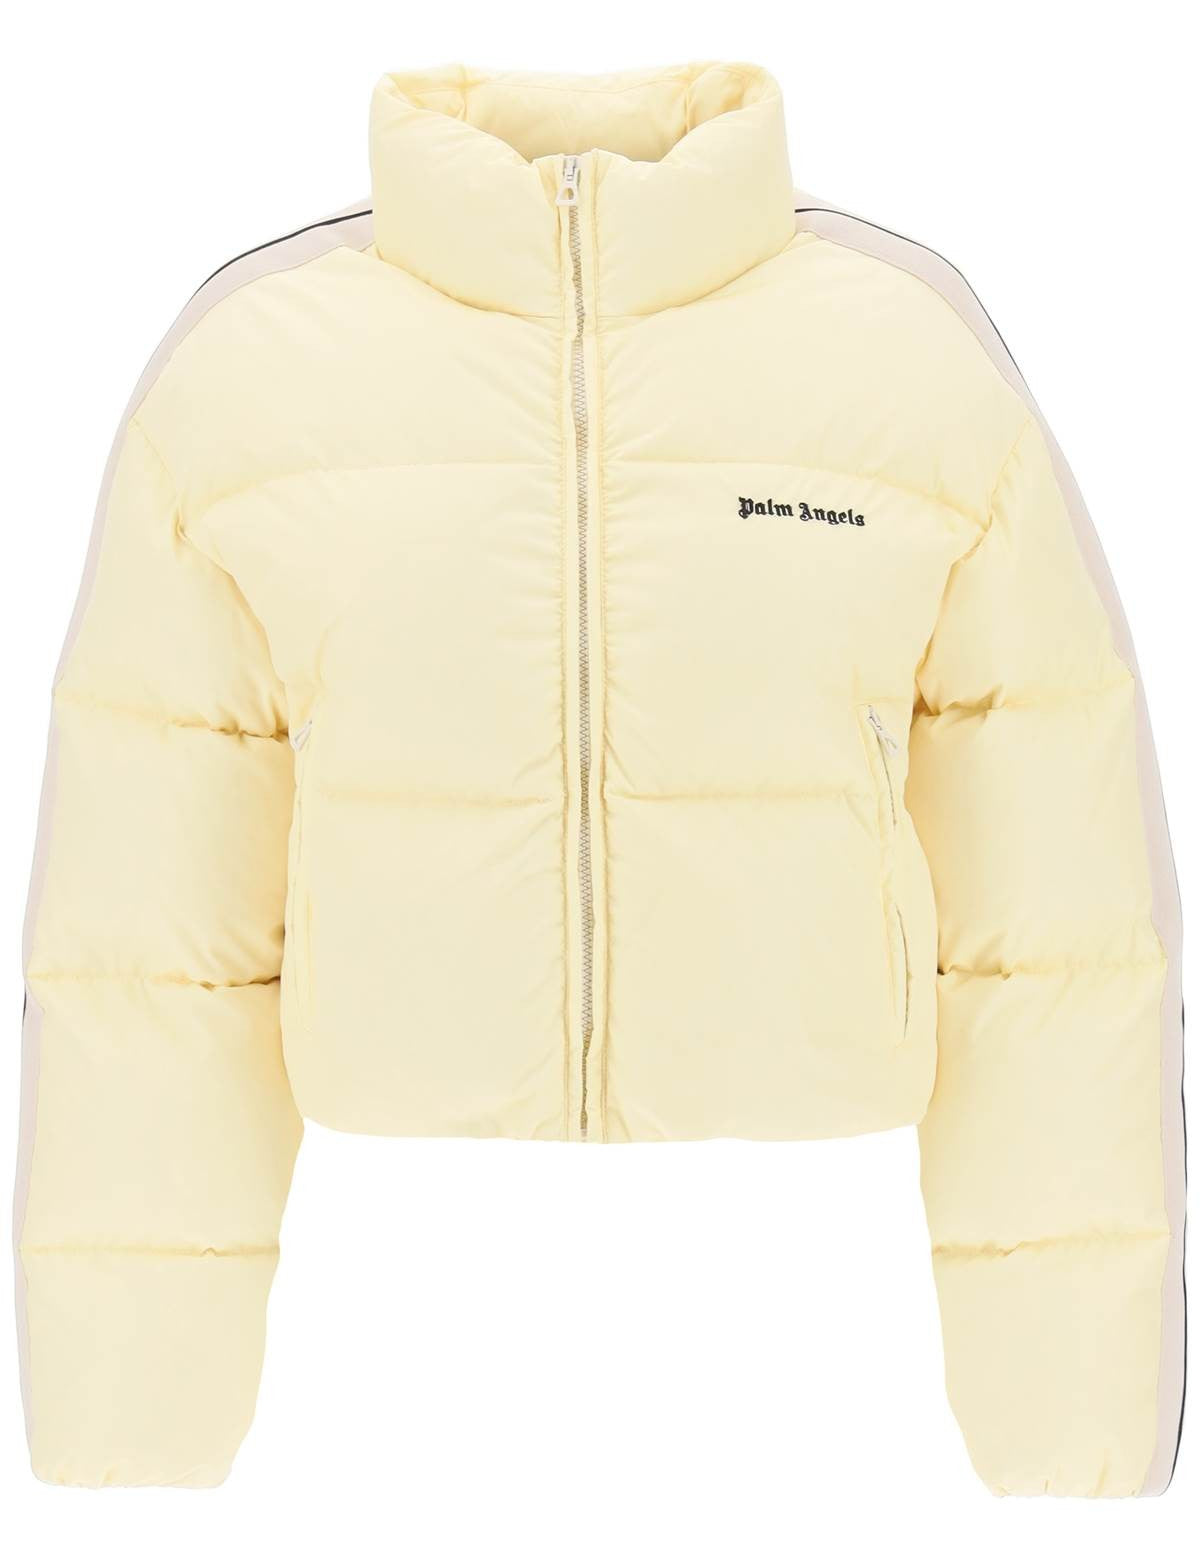 palm-angels-cropped-puffer-jacket-with-bands-on-sleeves.jpg